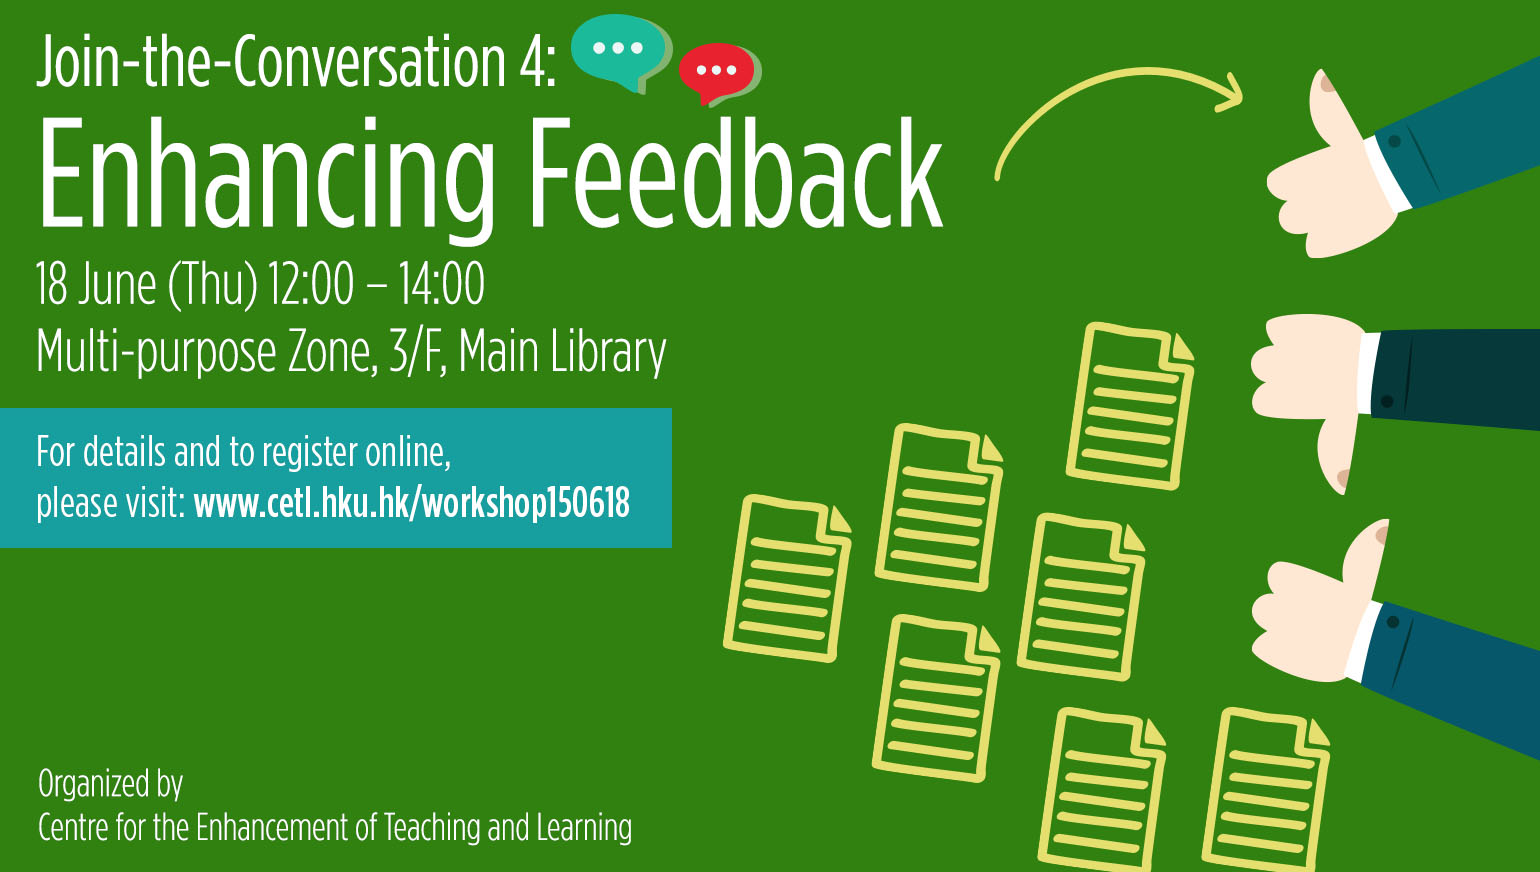 CETL Event  - Join-the-Conversation 4 : Enhancing Feedback 